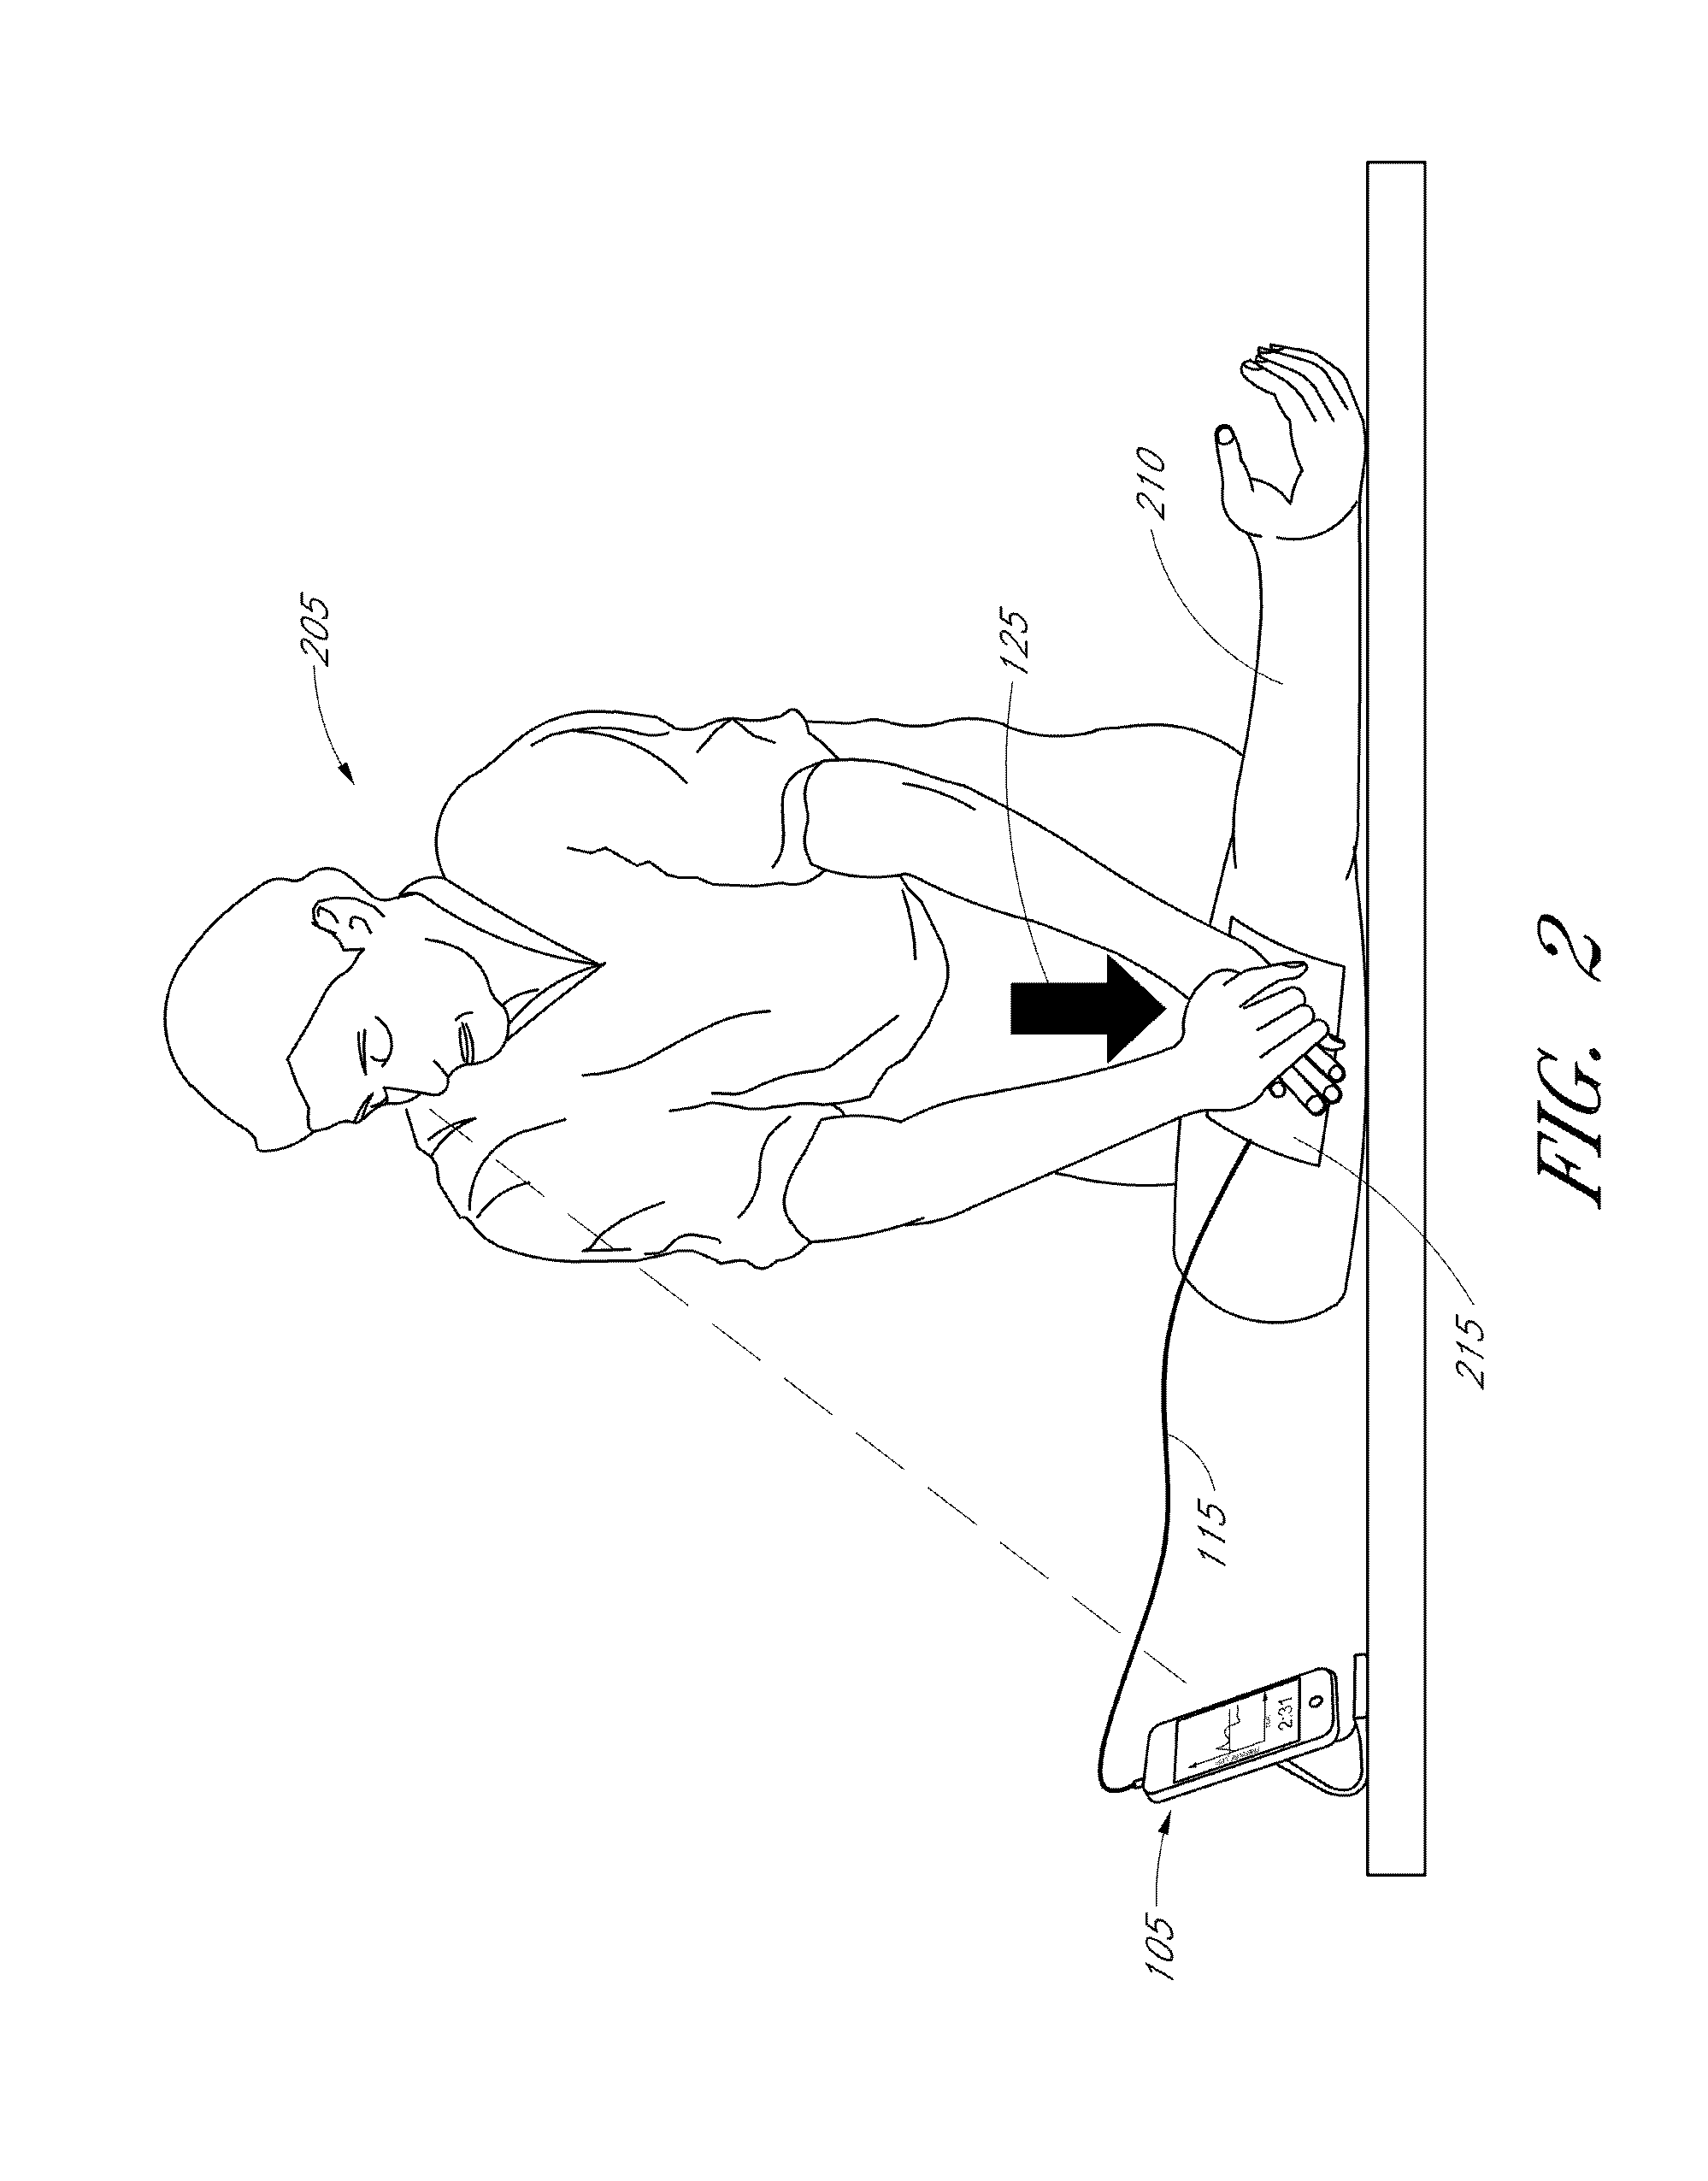 Systems and methods for providing hemorrhage control training